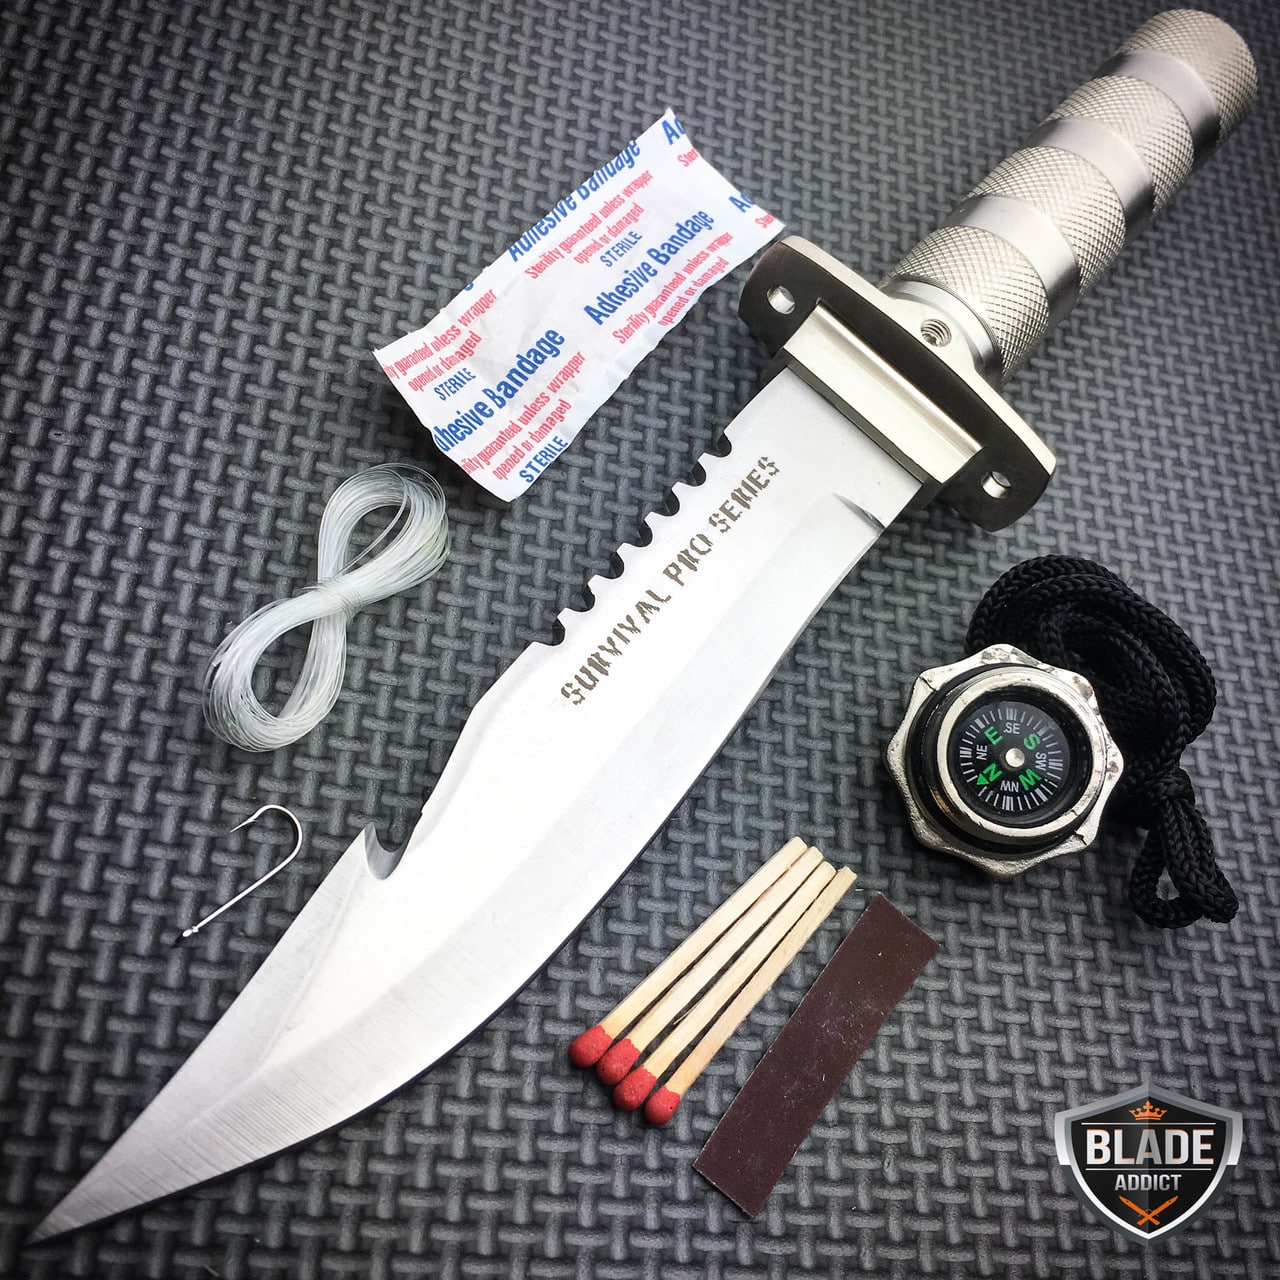 11" Tactical Fishing Hunting Survival Knife w/ Sheath Bowie Survival Kit Camping